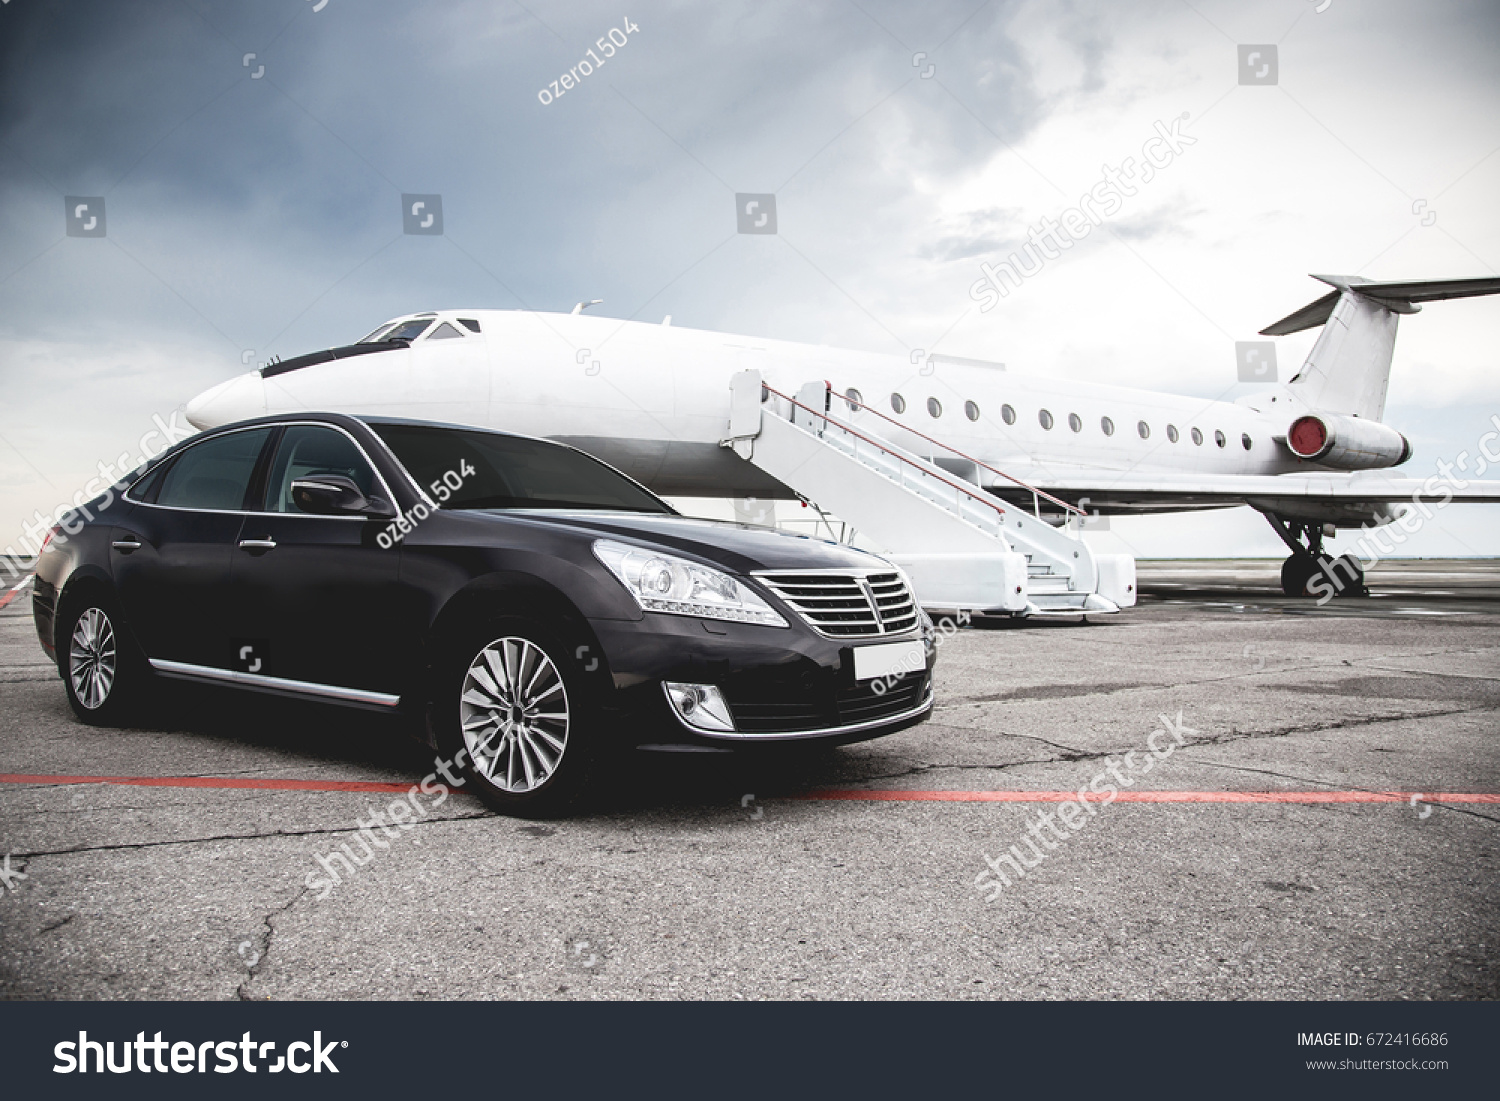 Business class service at the airport. Business class transfer. Airport shuttle #672416686